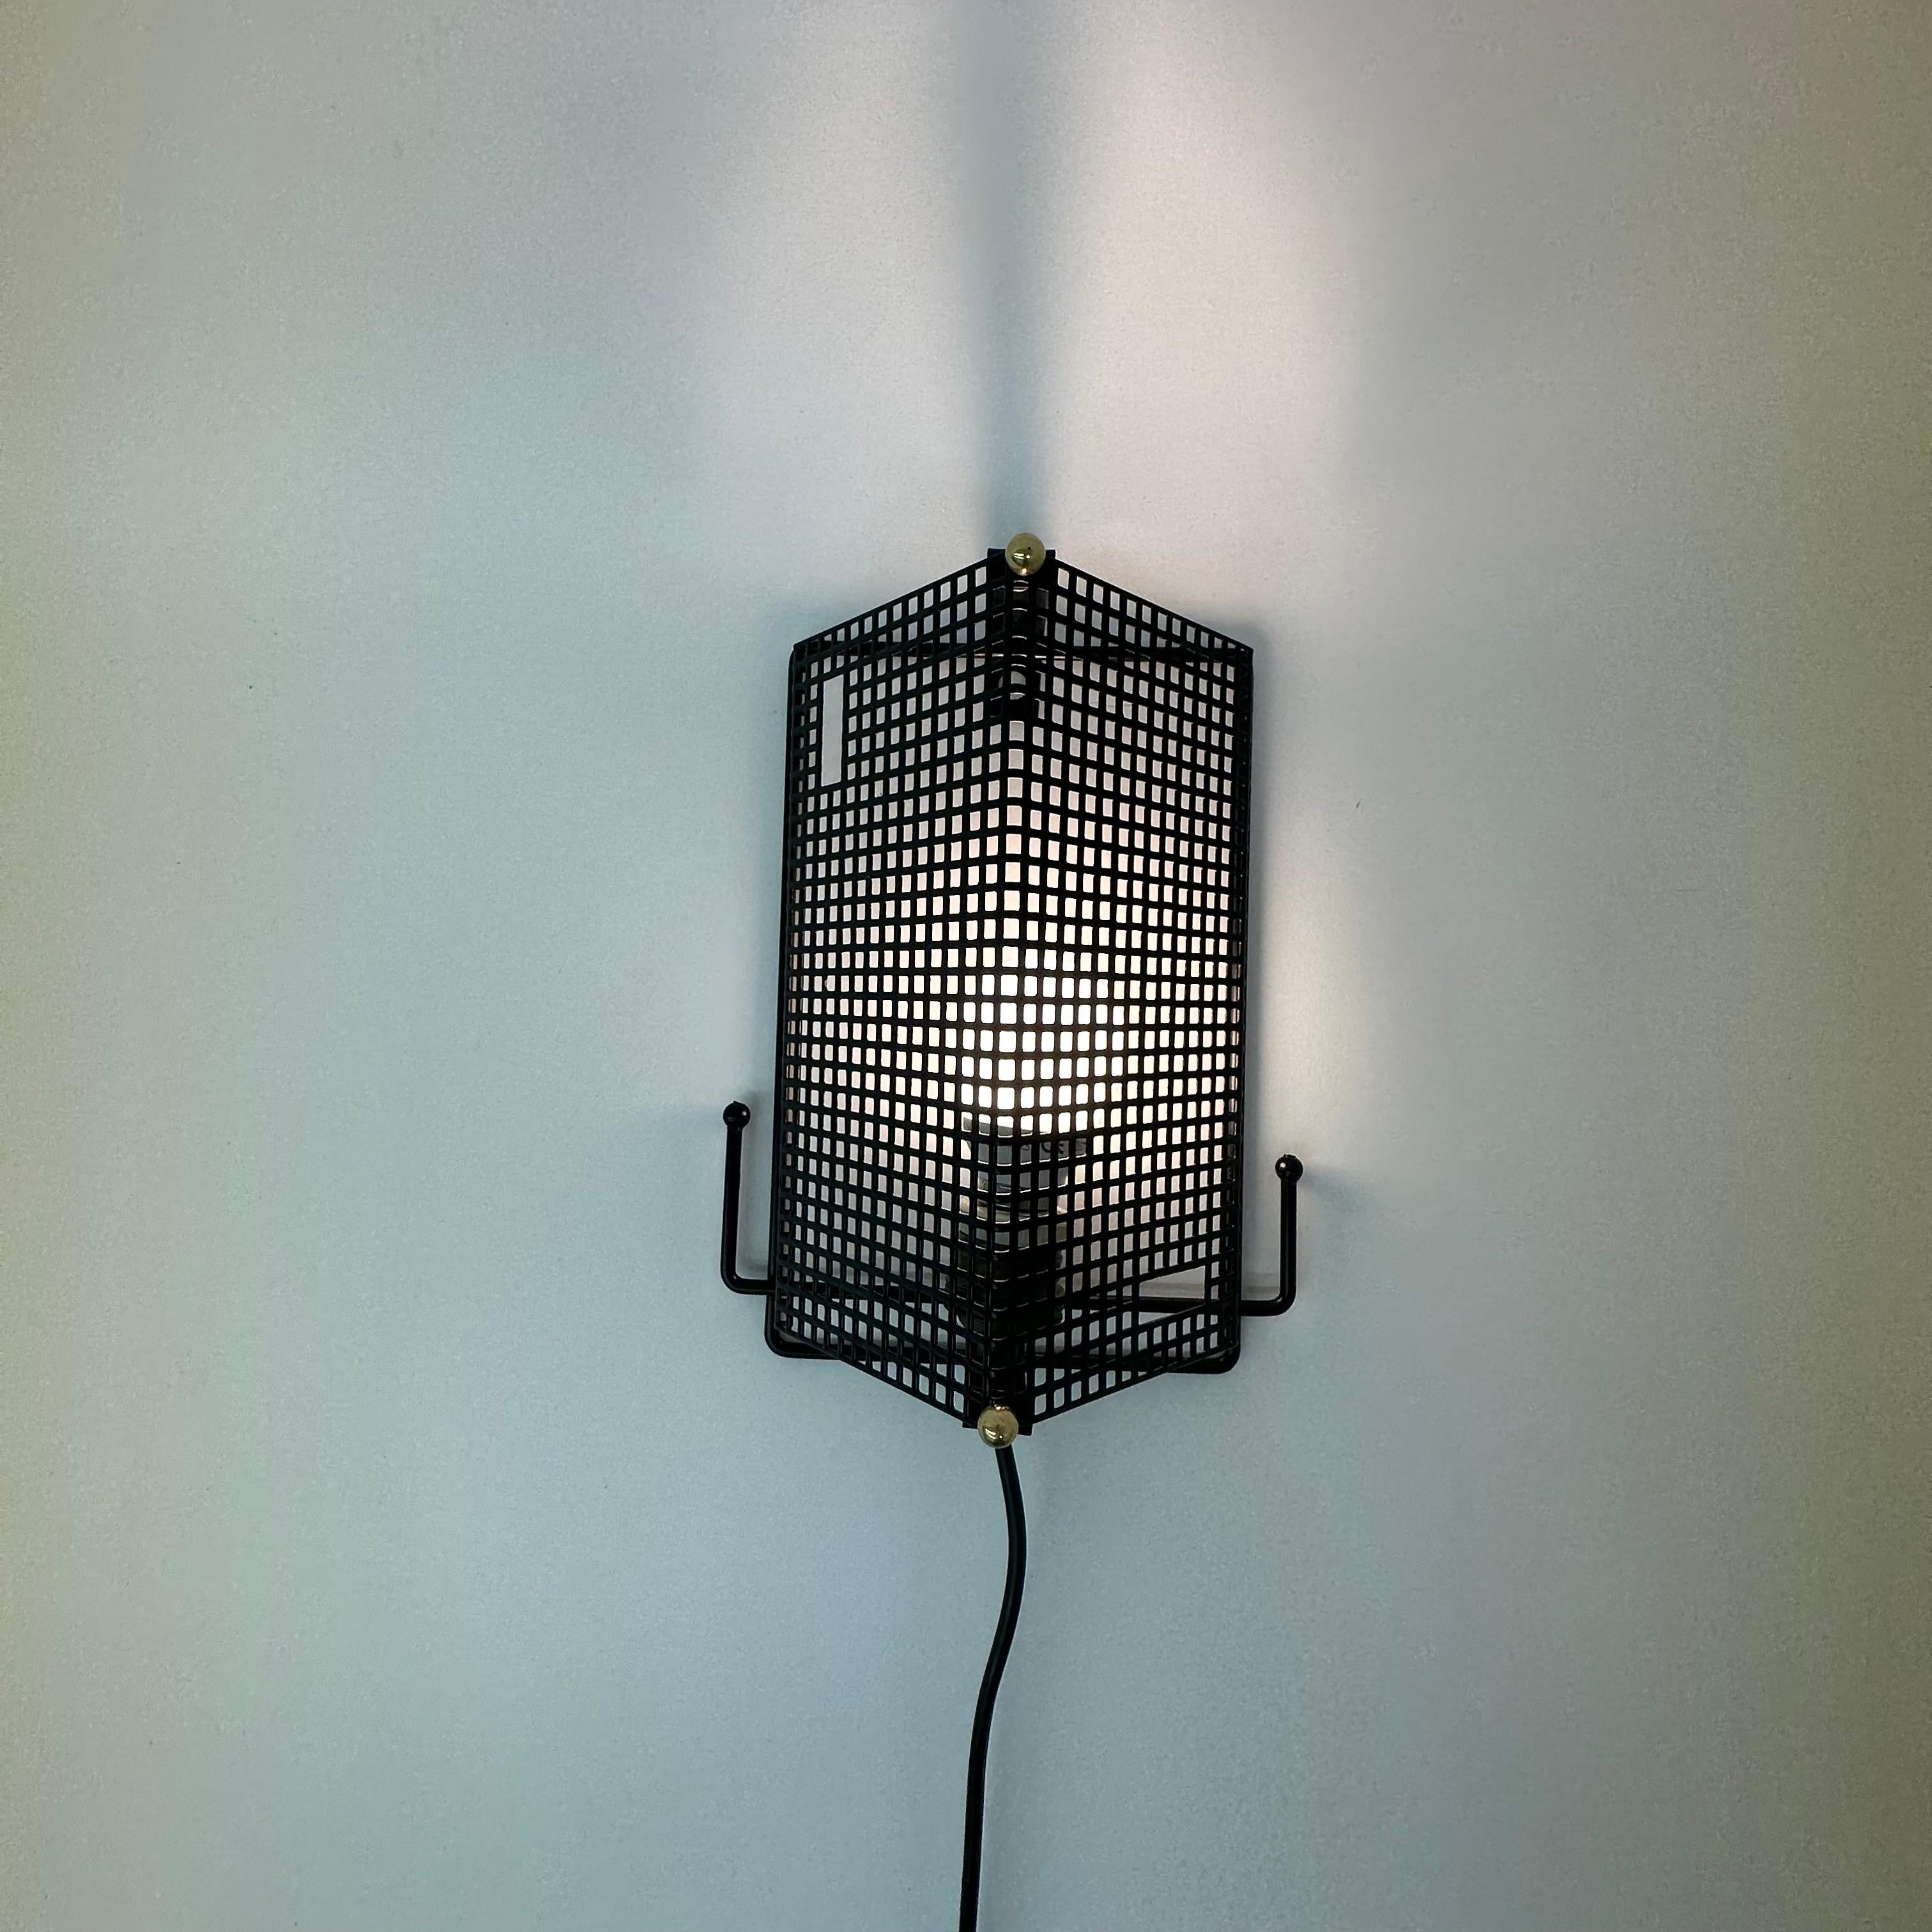 Mid-20th Century Midcentury Design Perforated Metal Wall Lamp by Tjerk Reijenga for Pilastro Dut For Sale